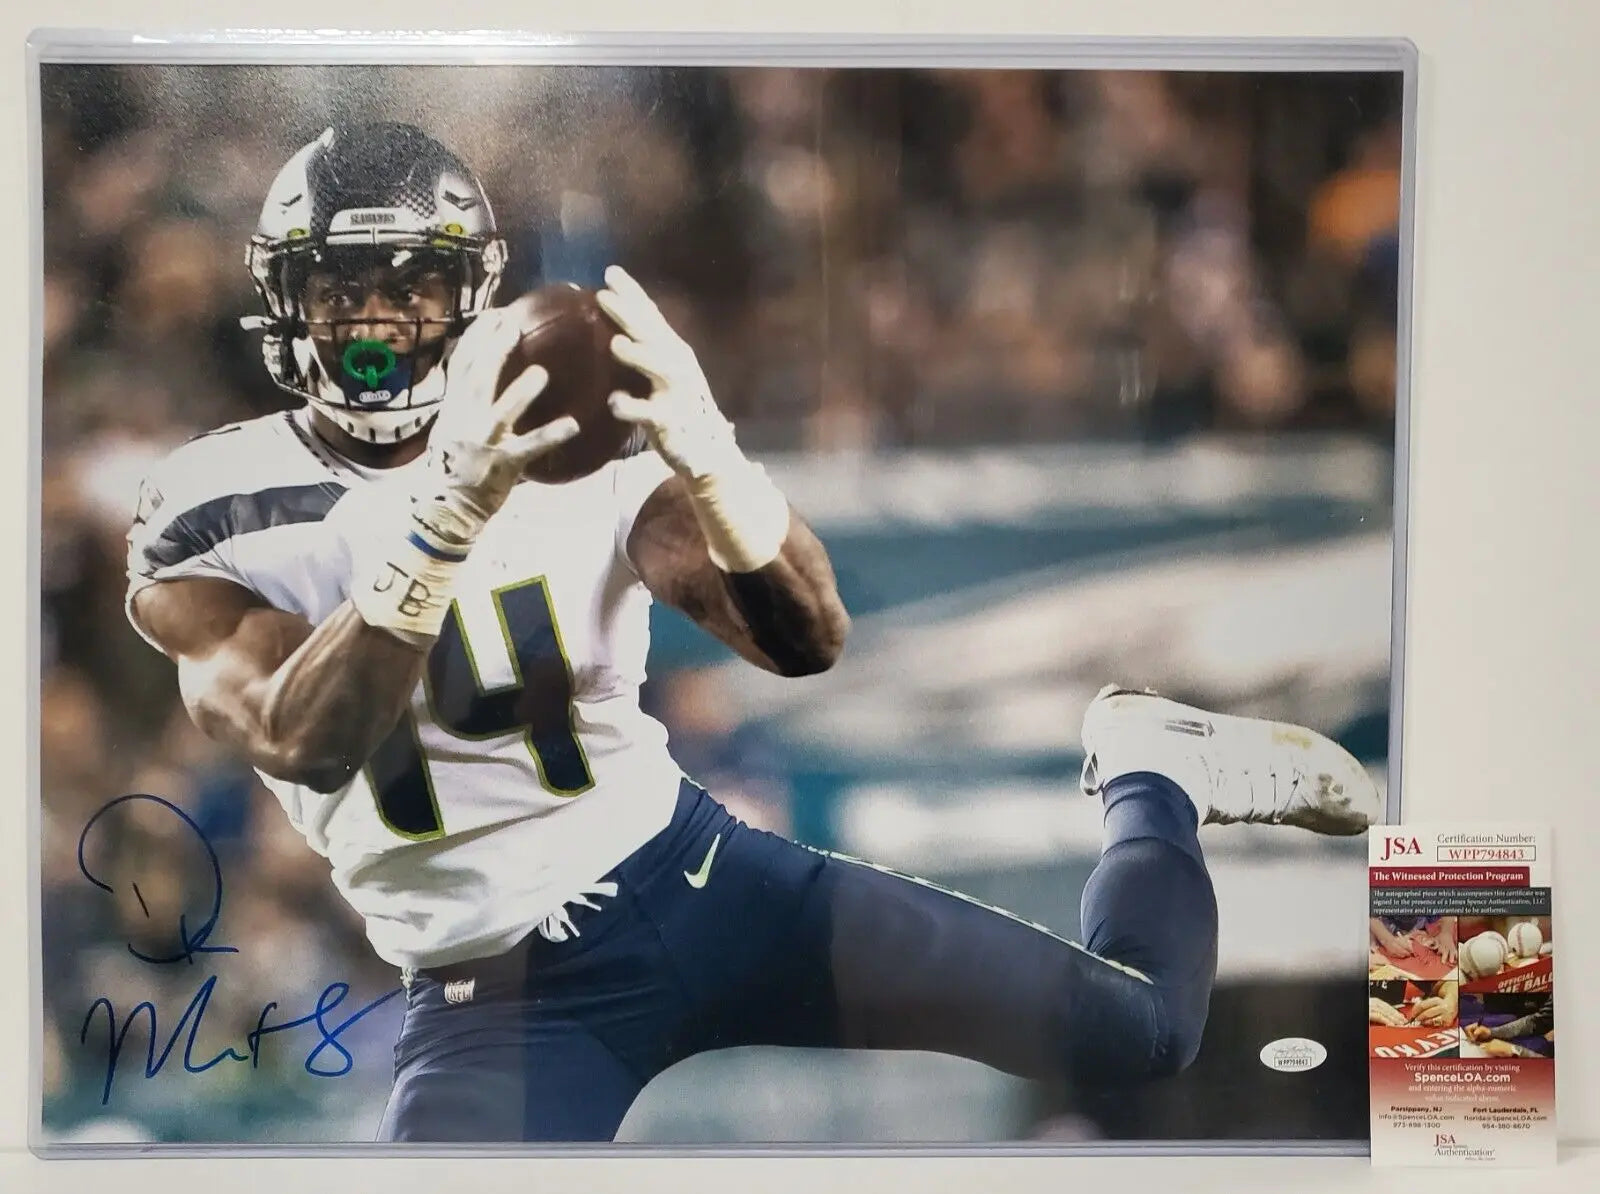 MVP Authentics Seattle Seahawks Dk Metcalf Autographed Signed 16X20 Photo Jsa  Coa 116.10 sports jersey framing , jersey framing